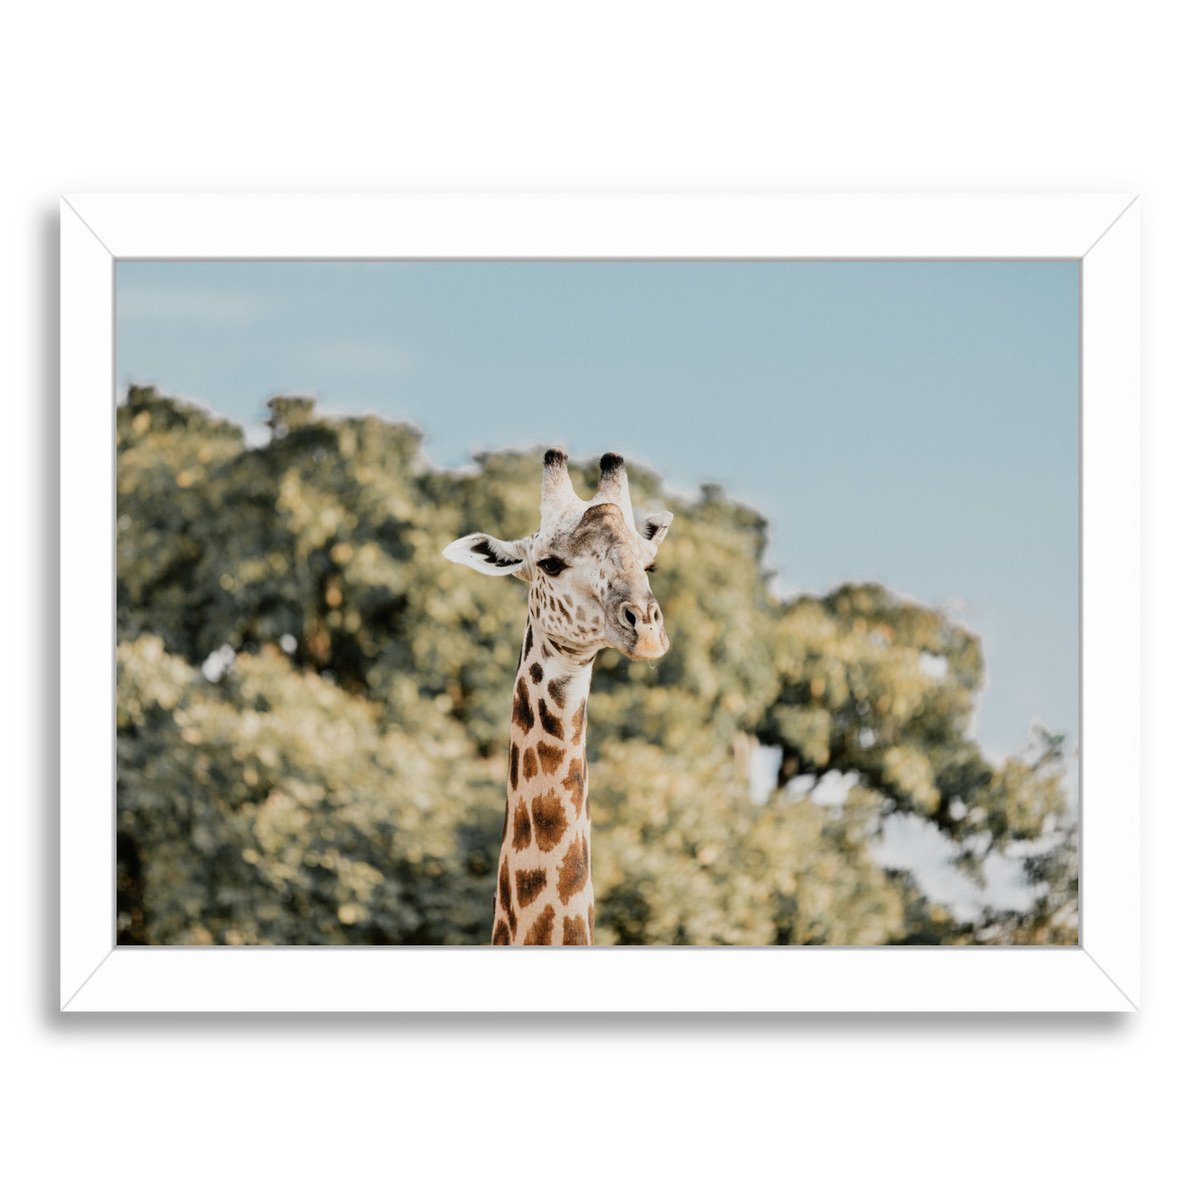 Zambia By Natalie Allen - Framed Print - Americanflat